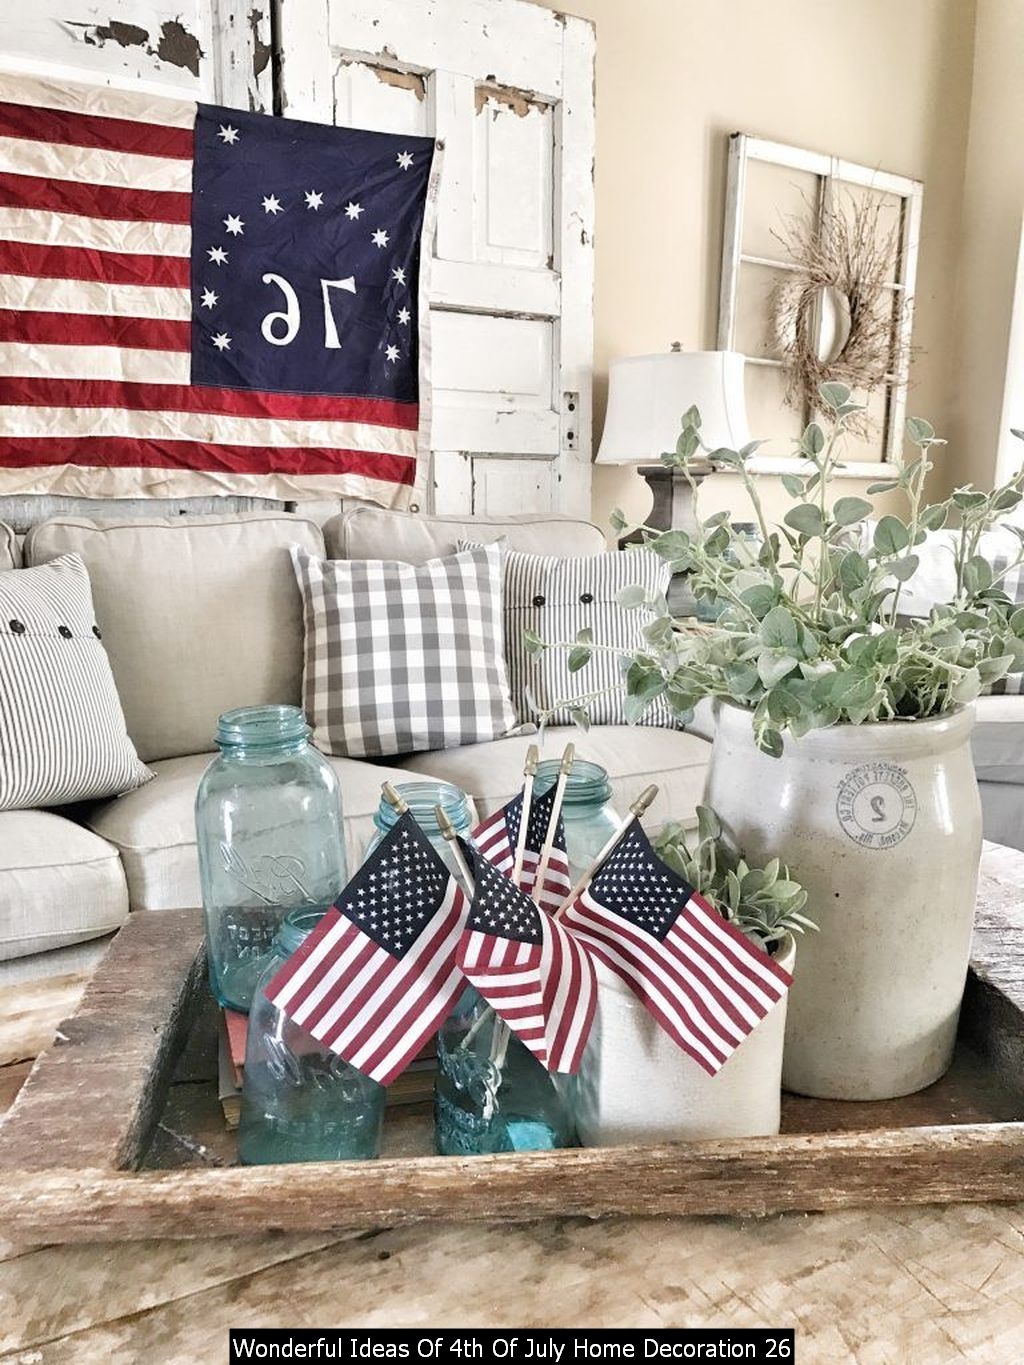 Wonderful Ideas Of 4th Of July Home Decoration 26